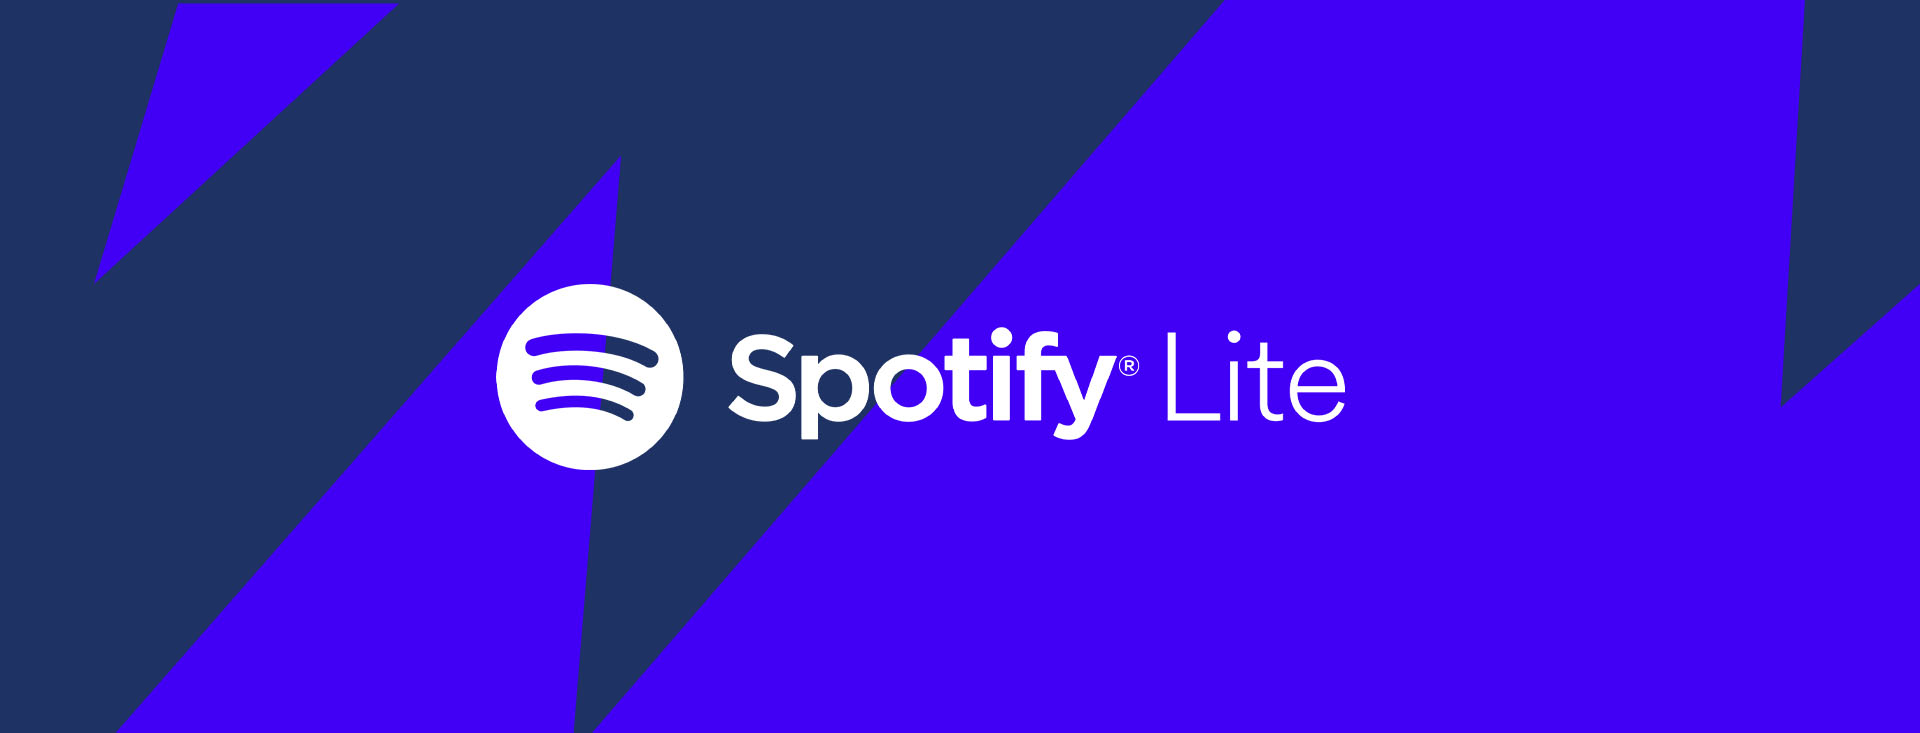 Spotify Lite announce the most streamed tracks, podcasts and top markets